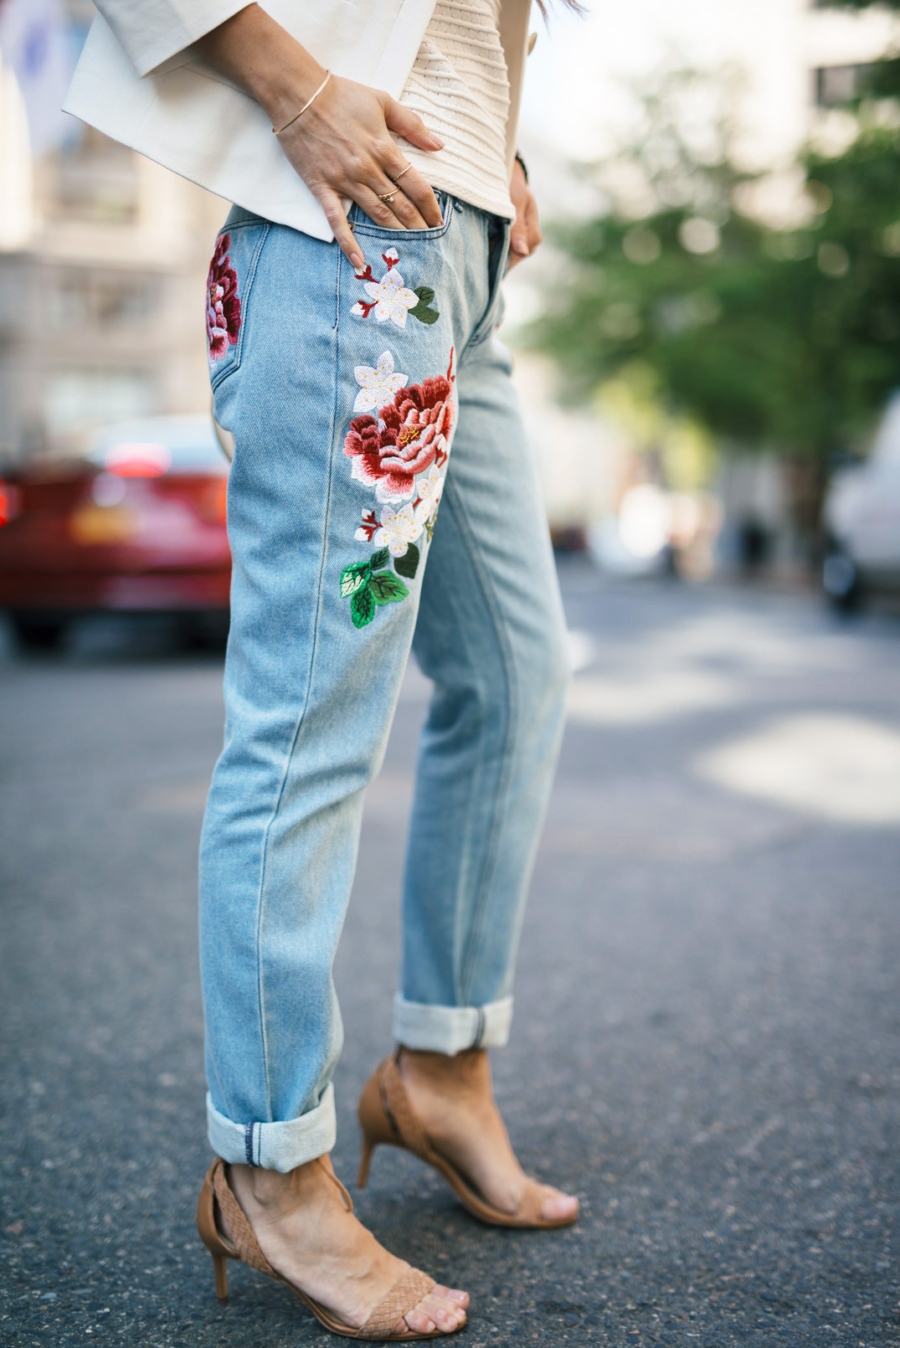 Floral Embroidered Denim Jeans - 7 Pieces That Look Adorable With Flower Embroidery // Notjessfashion.com